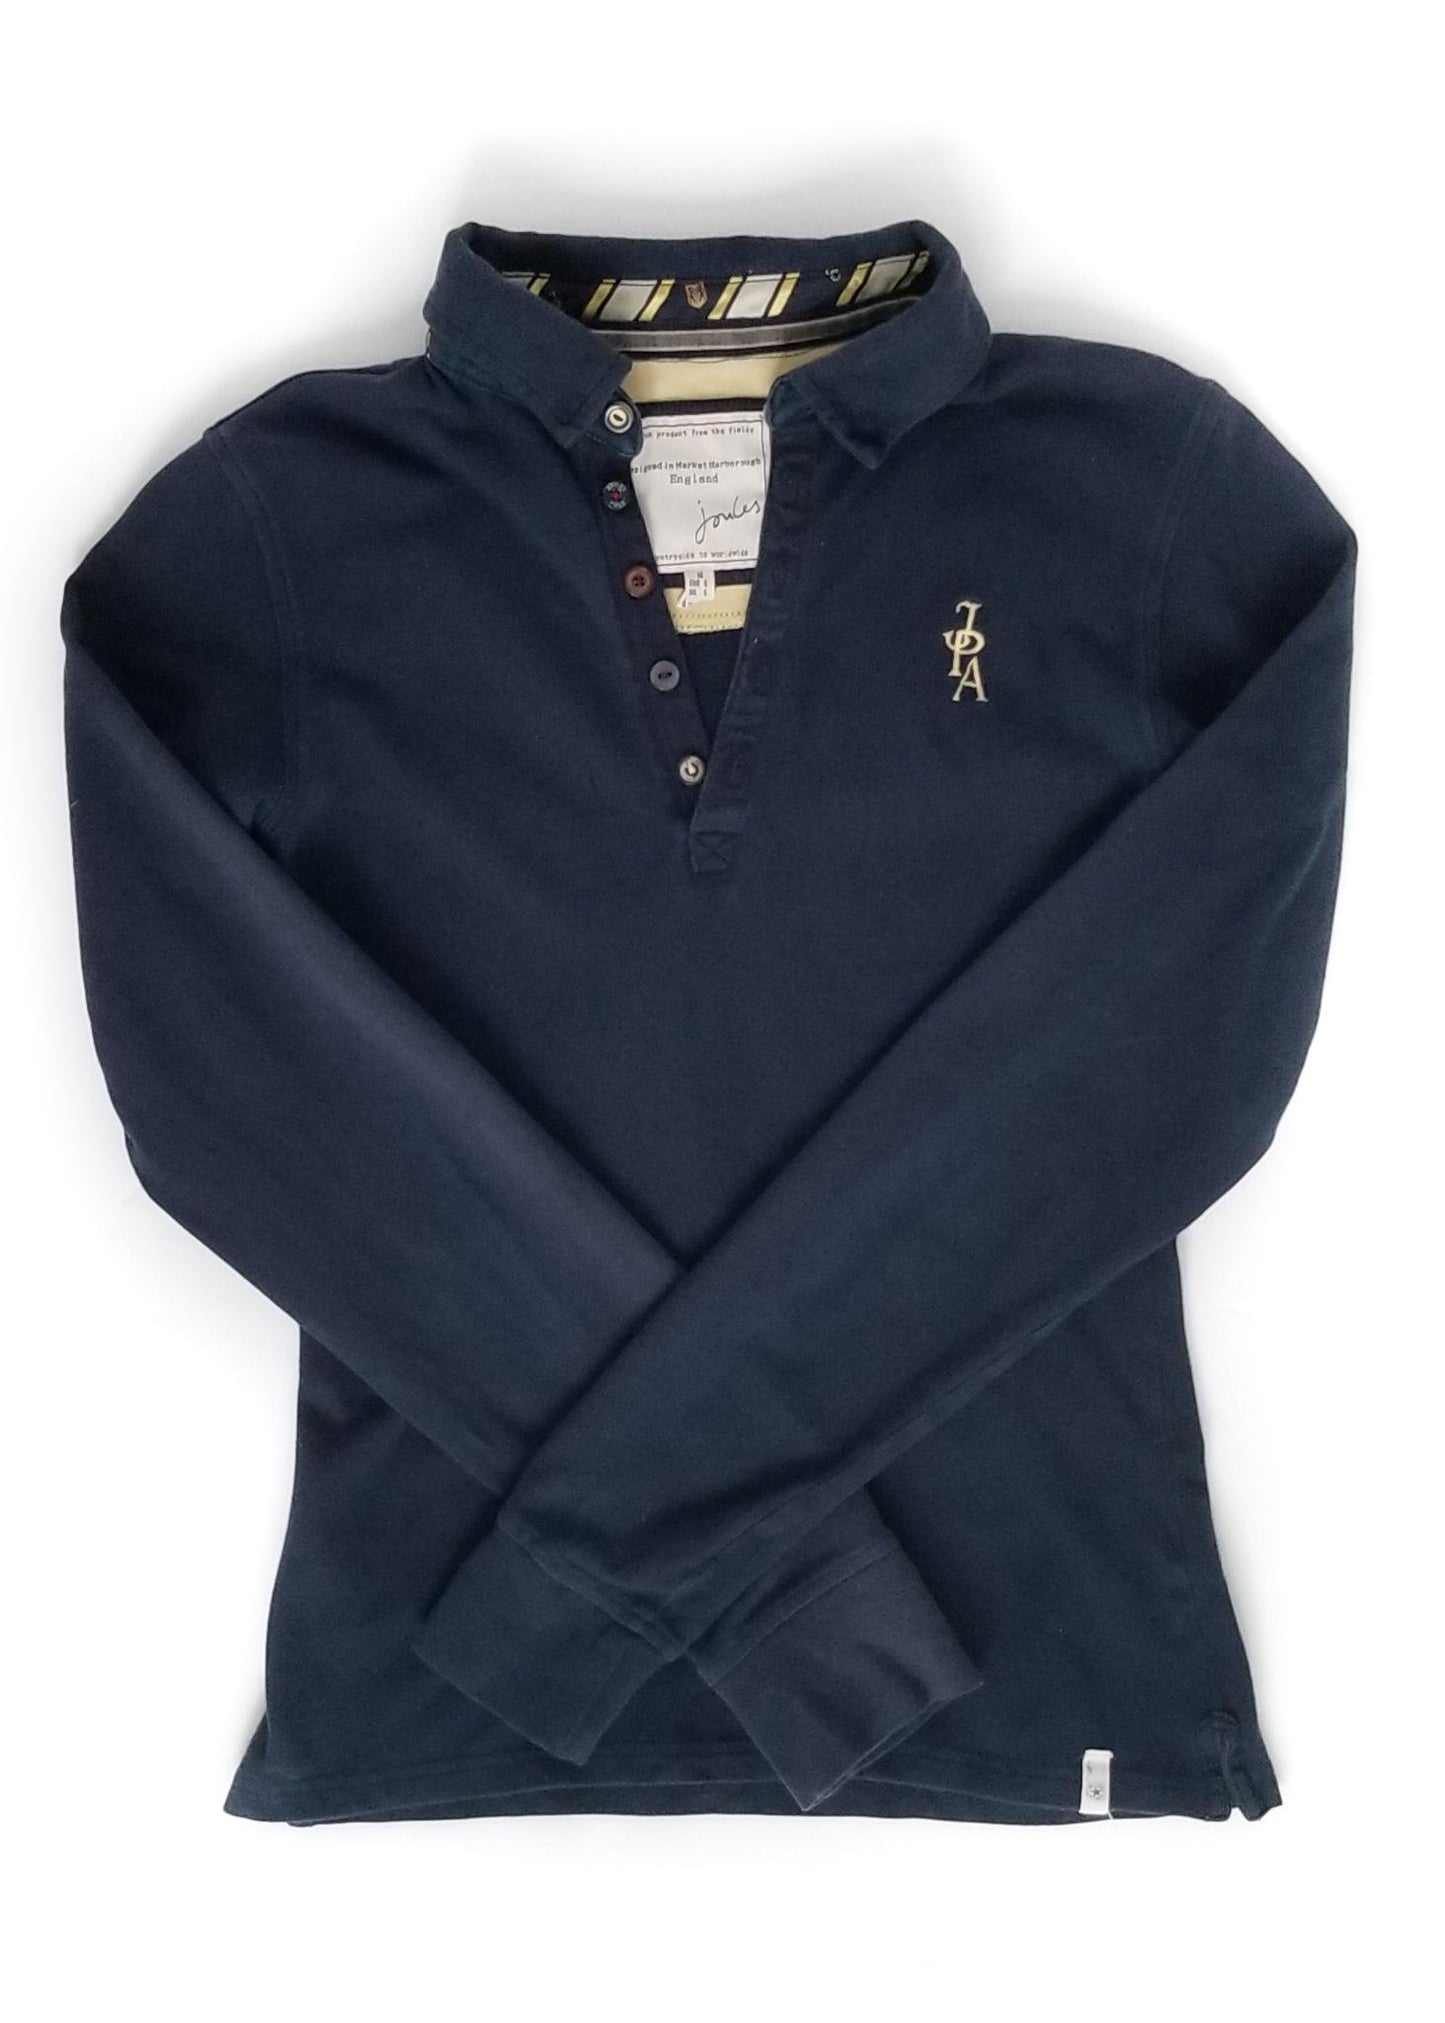 Joules Long Sleeve Polo - Navy - Women's Size 6